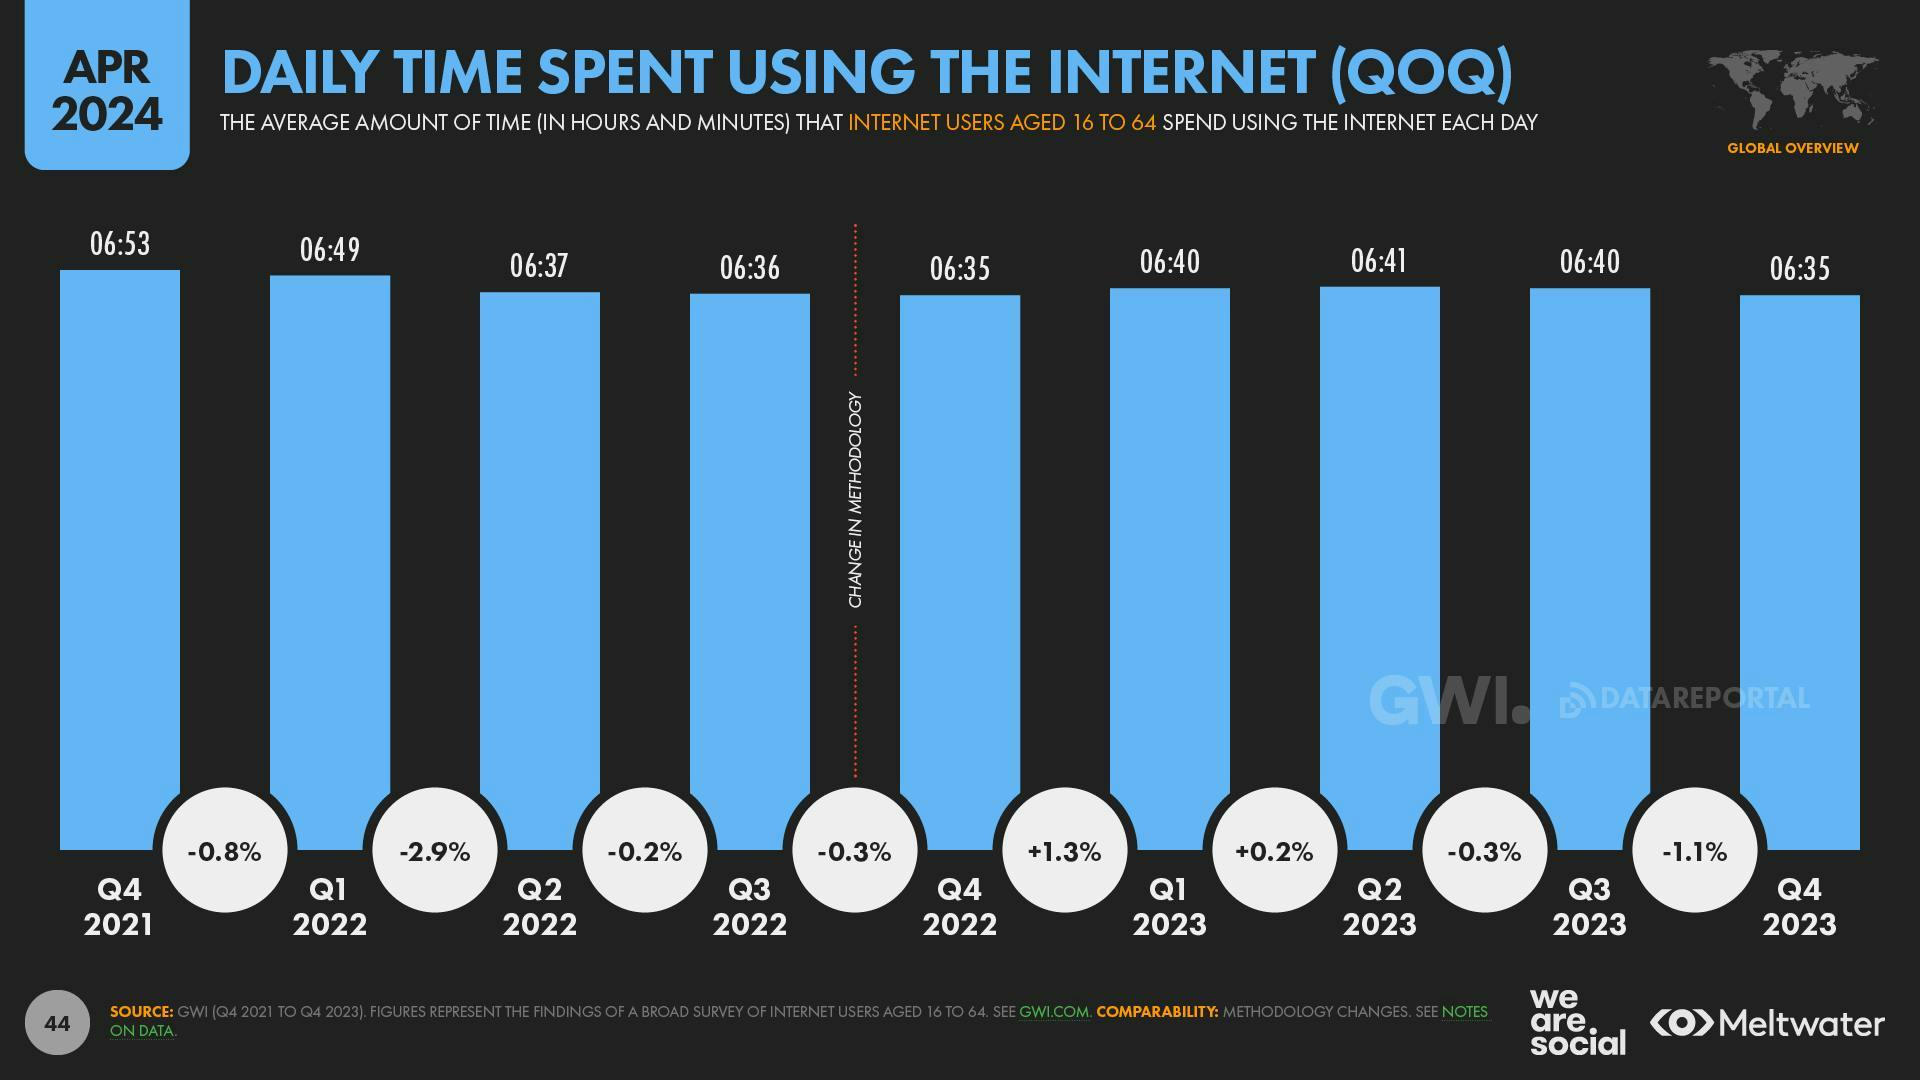 Daily time spent using the internet (QOQ)